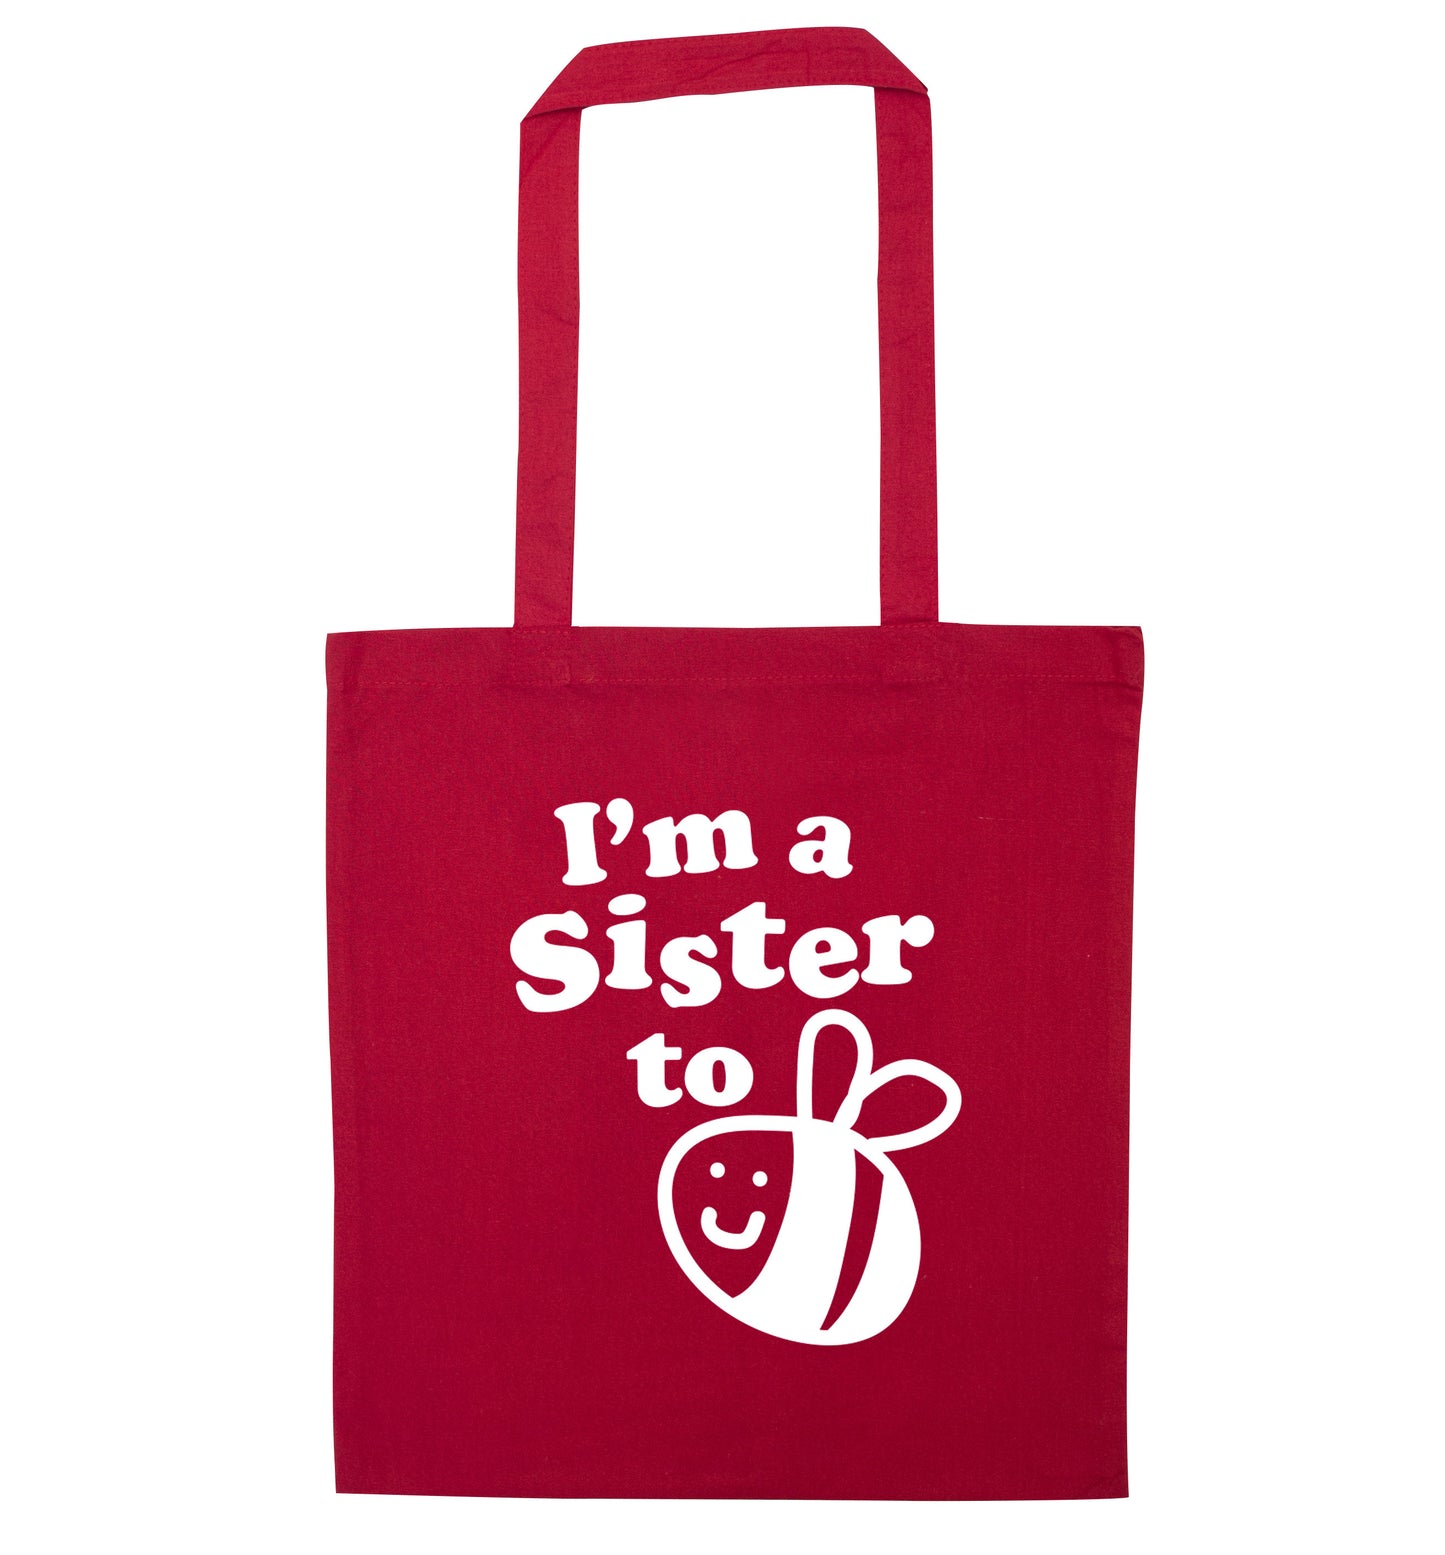 I'm a sister to be red tote bag